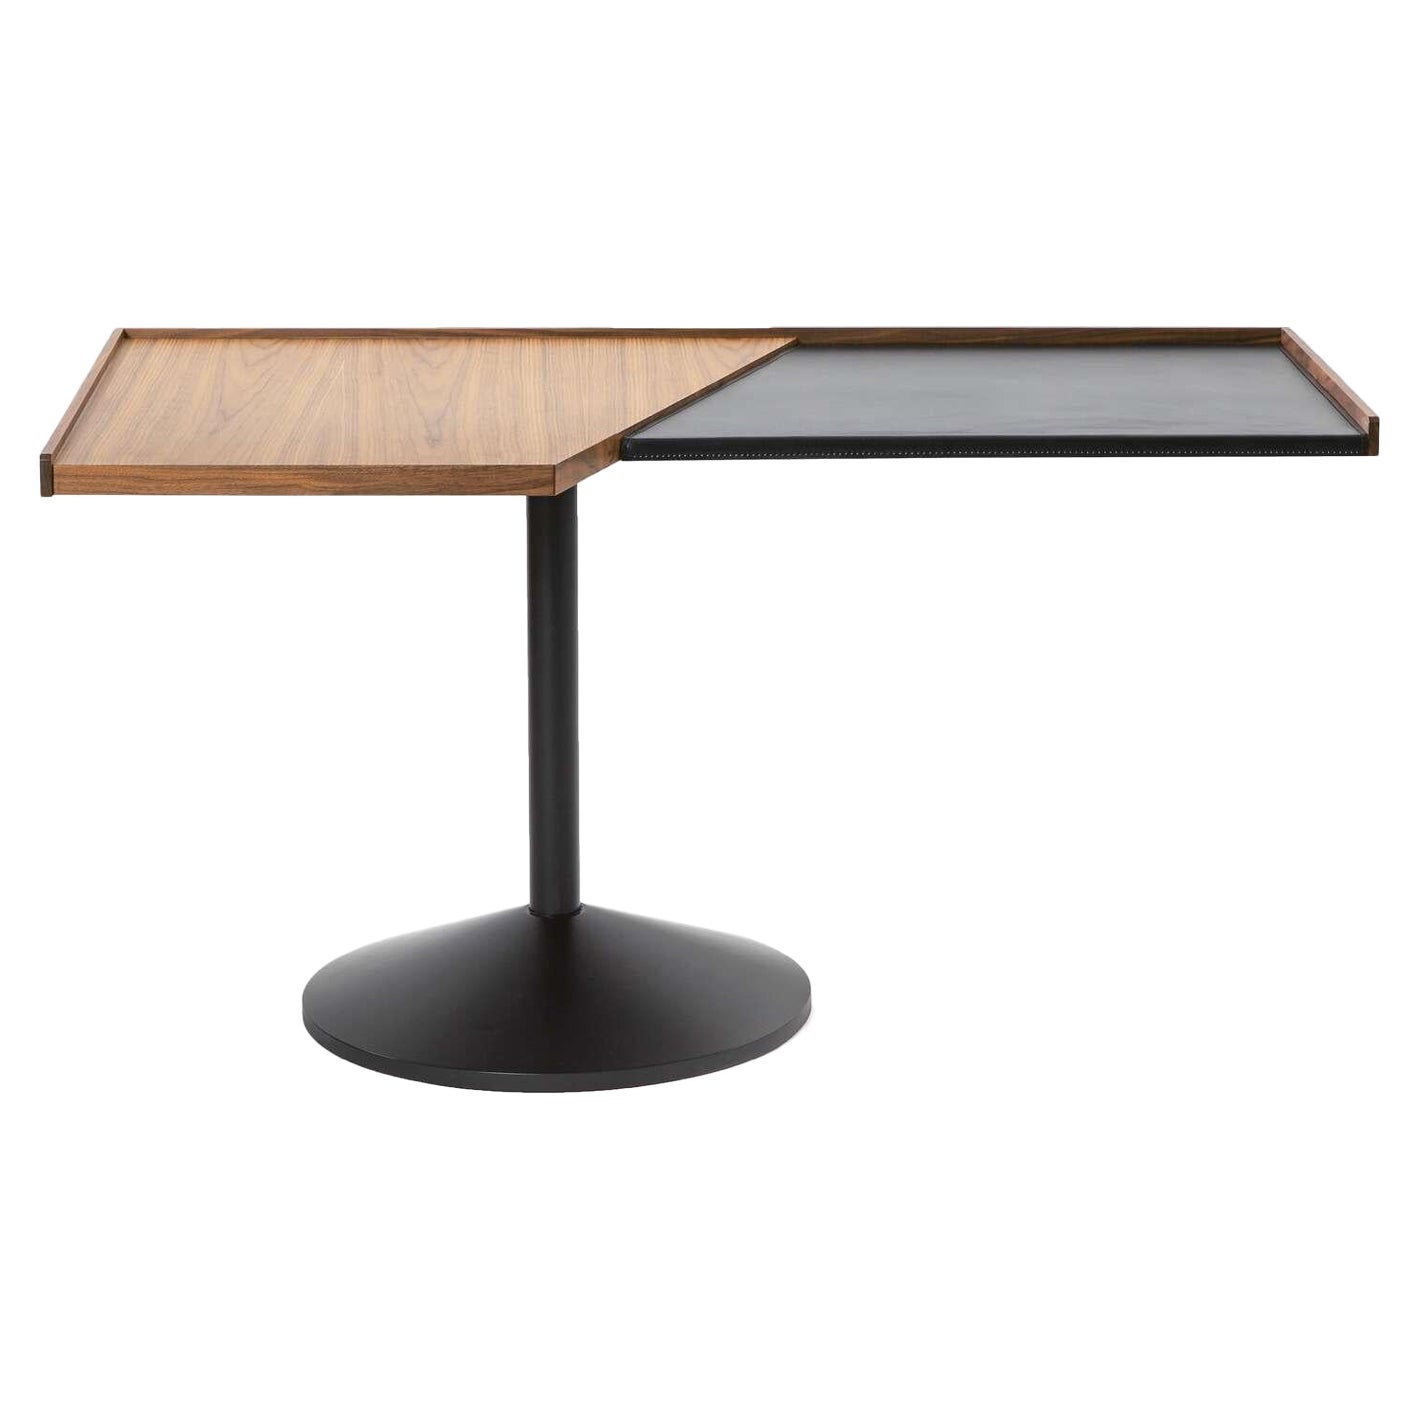 Franco Albini 840 Stadera Wood and Steel Table for Cassina, Italy, 2022